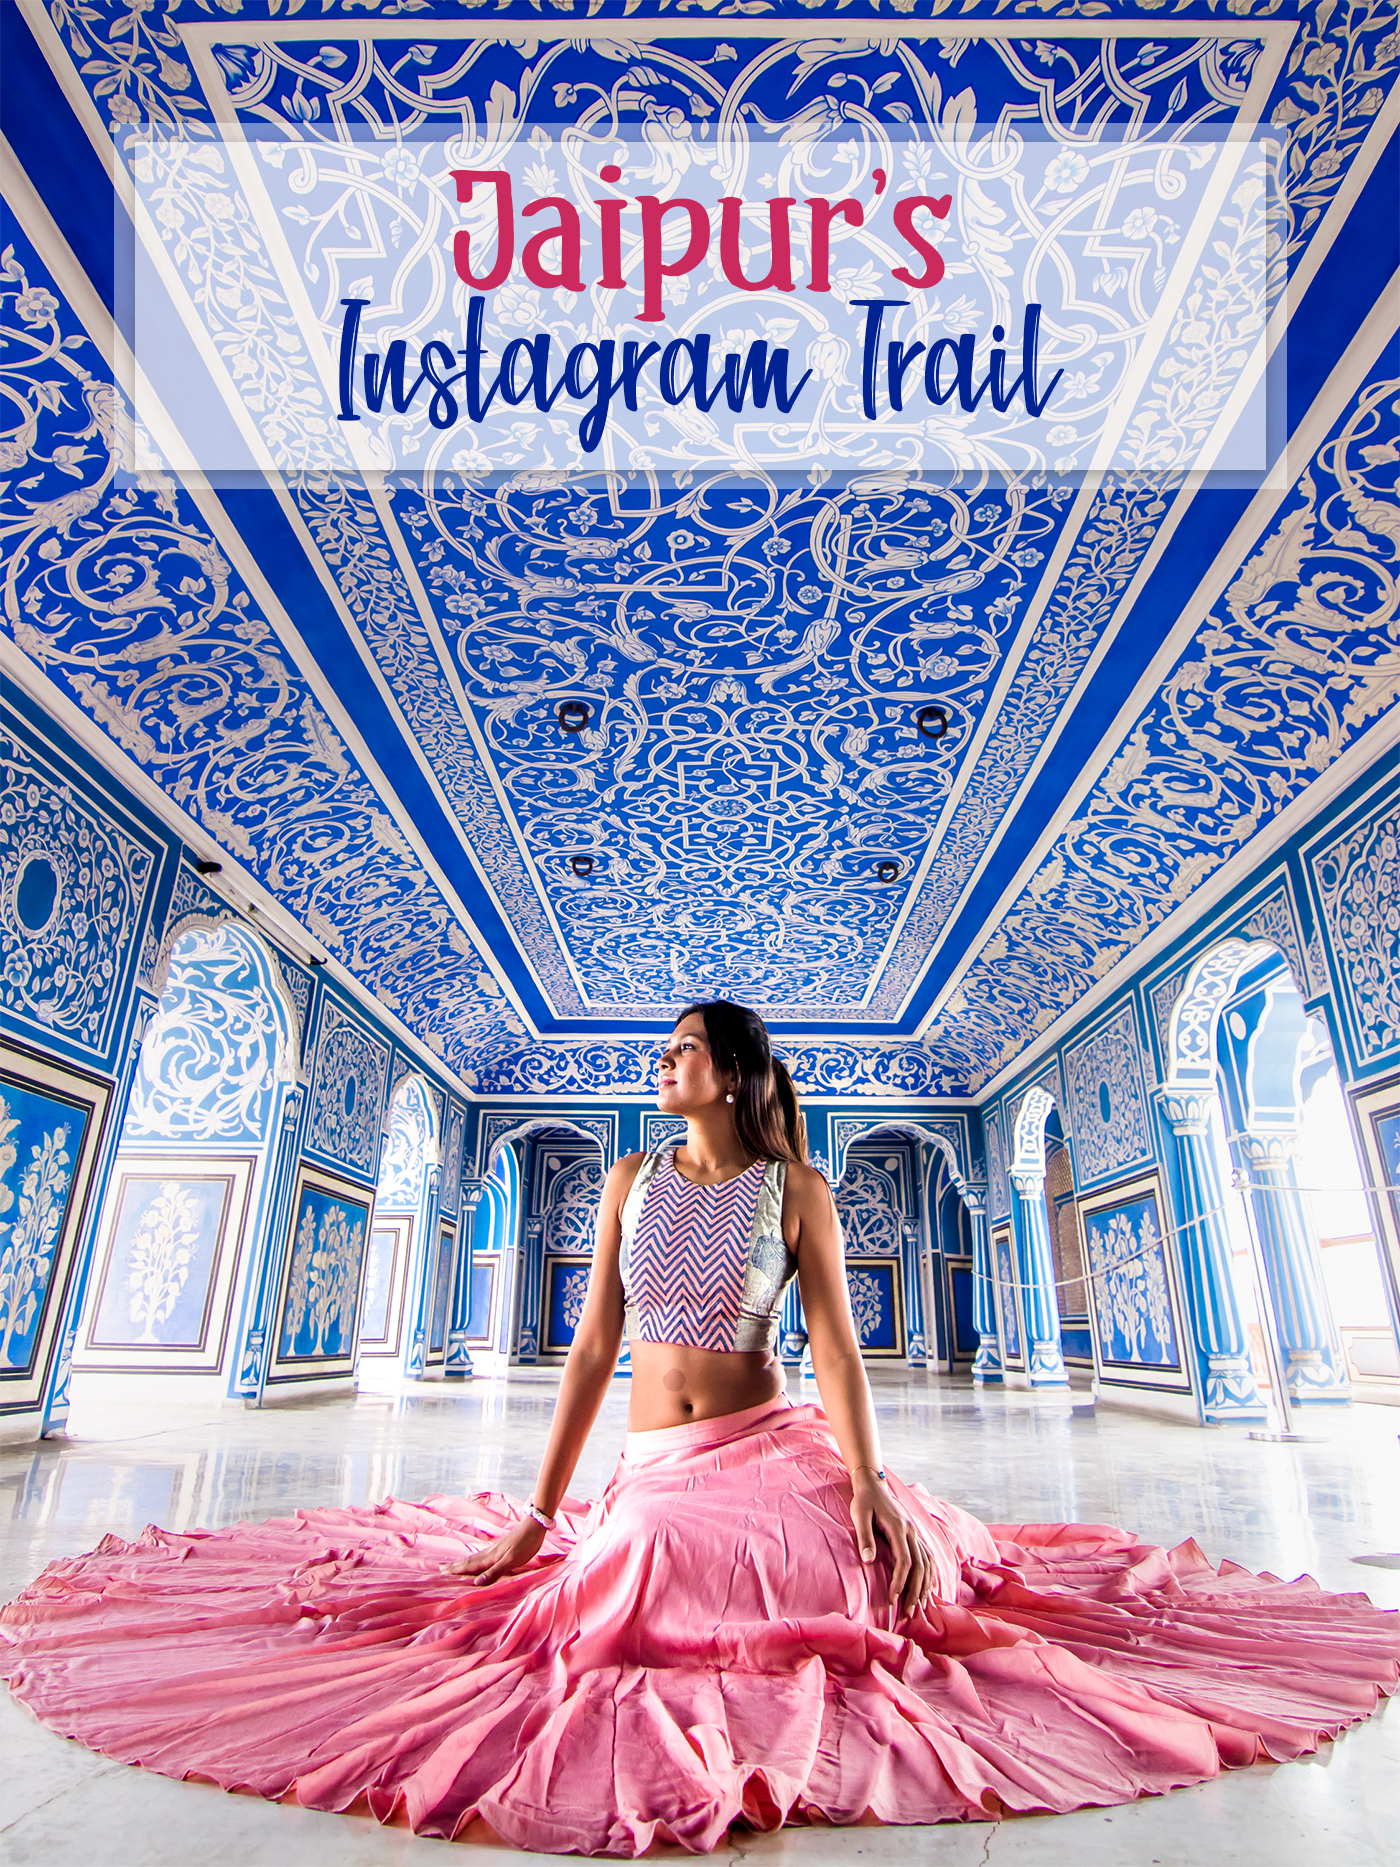 Jaipur_Instagram_Photo_Trail_Itinerary__DIY_Pink_City_Rajasthan_Travel_Blog_India_Blog_Blogger_Guide_Asia_Palaces_Forts_Culture